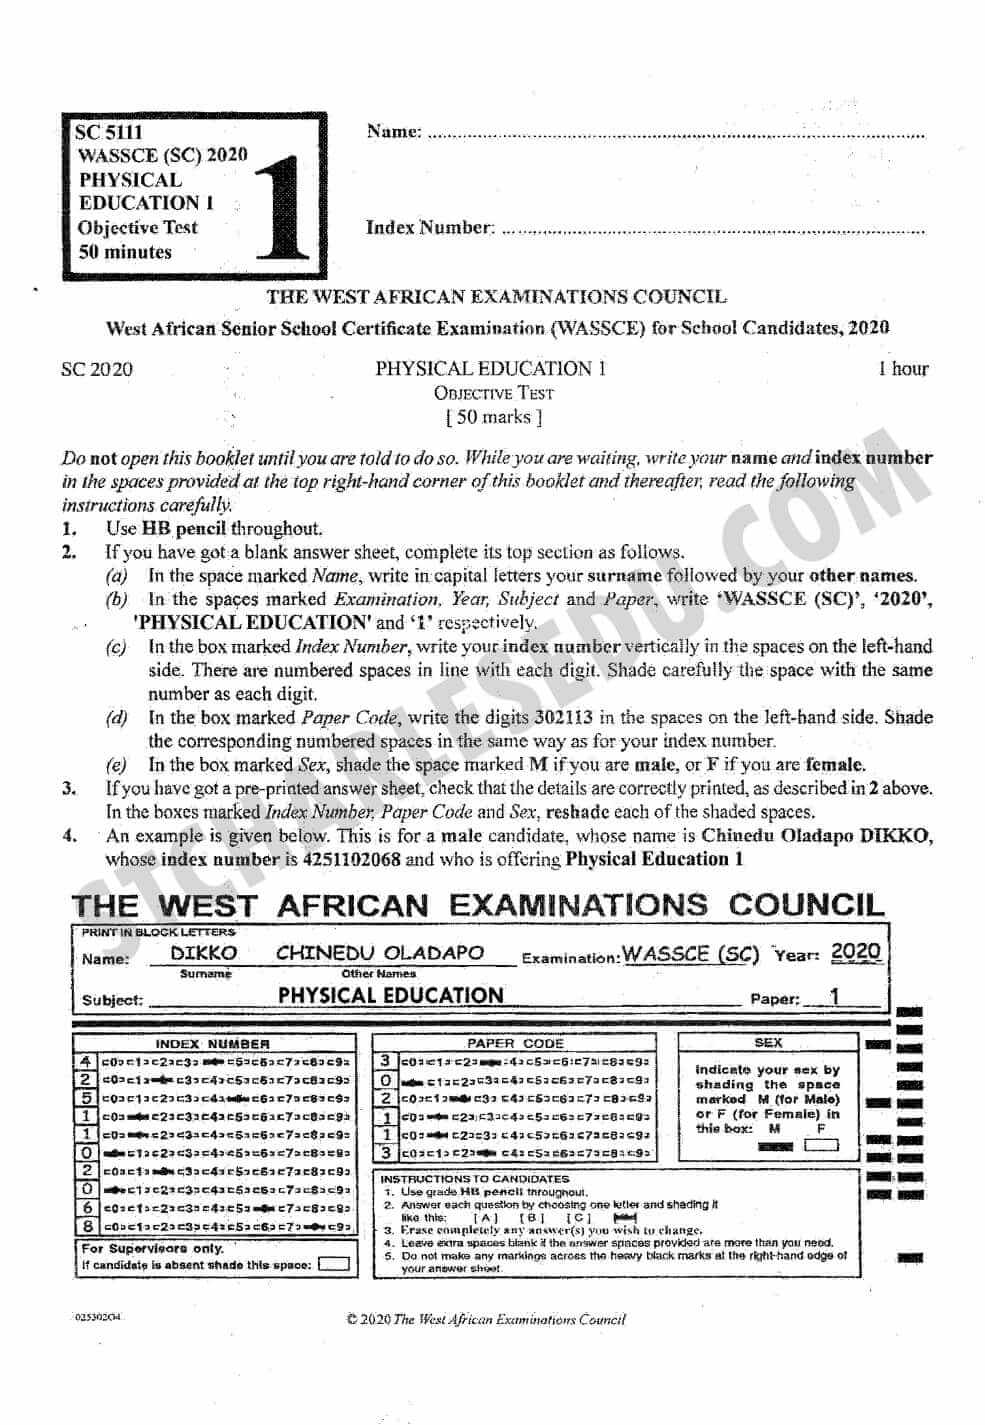 waec essay questions and answers pdf